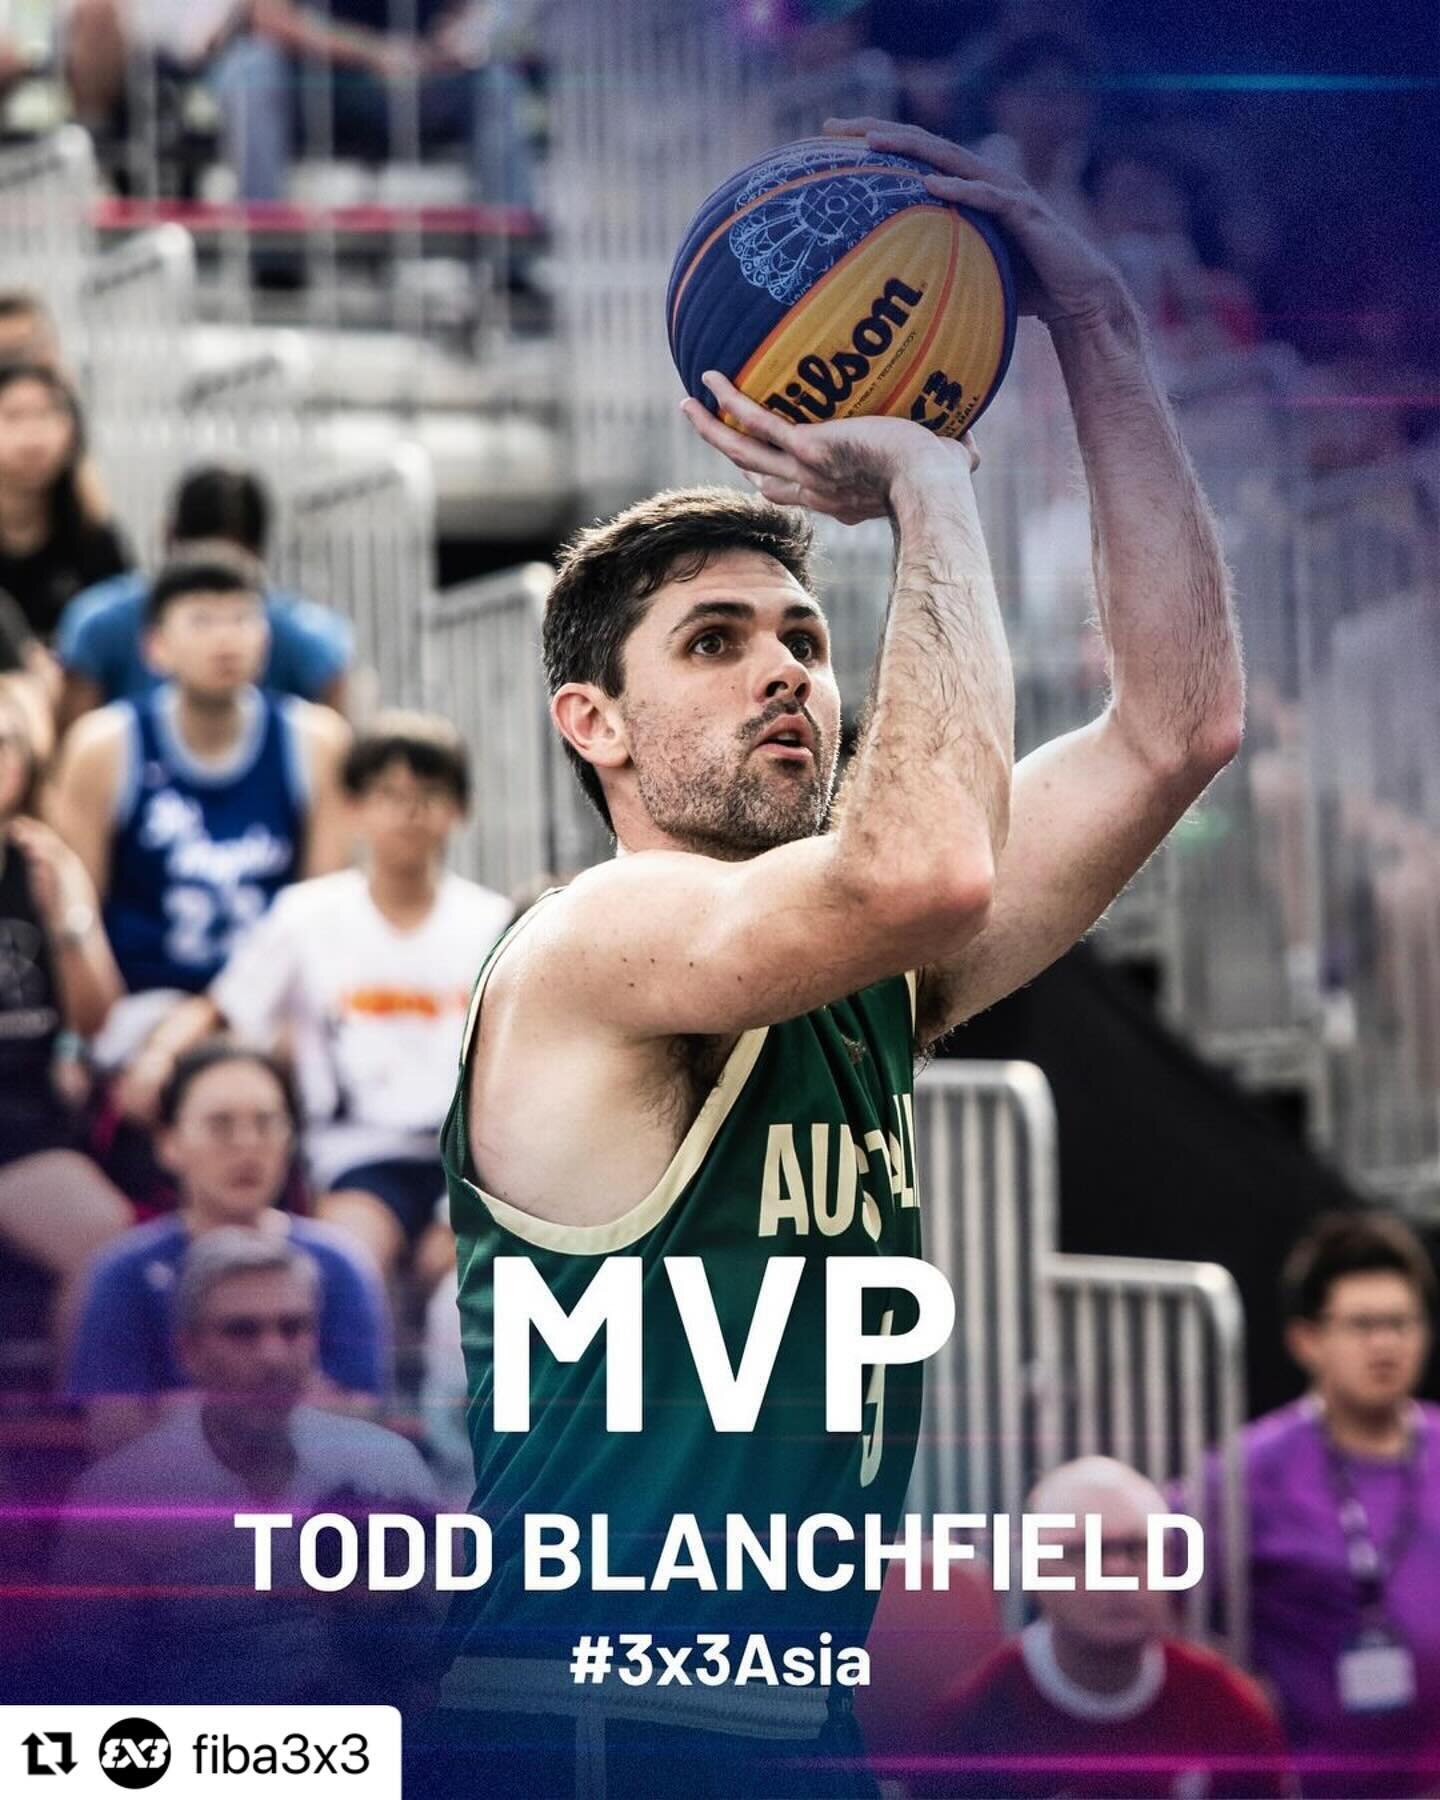 #Repost @fiba3x3
・・・
𝙏𝙊𝘿𝘿 𝘽𝙇𝘼𝙉𝘾𝙃𝙁𝙄𝙀𝙇𝘿 🇦🇺

The #3x3Asia Cup 2024 MVP @toddyblanch was ON FIRE🔥